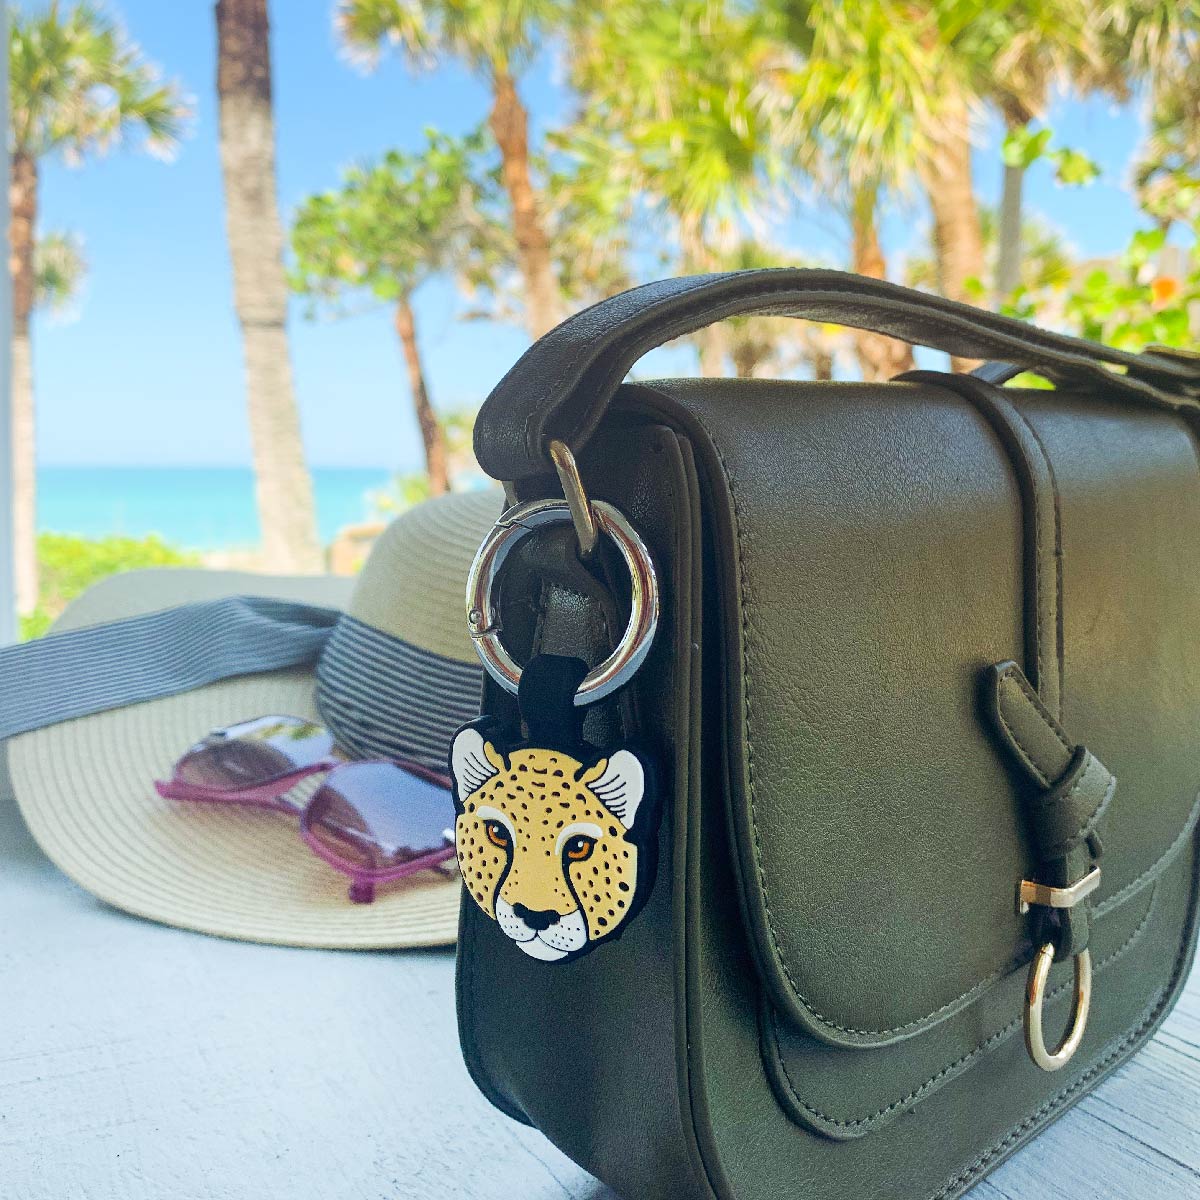 Wild Cat mini, the limited-edition Bagnet magnetic purse holder, clipped to a black leather purse, sitting on a deck with the blue coastline in the distance